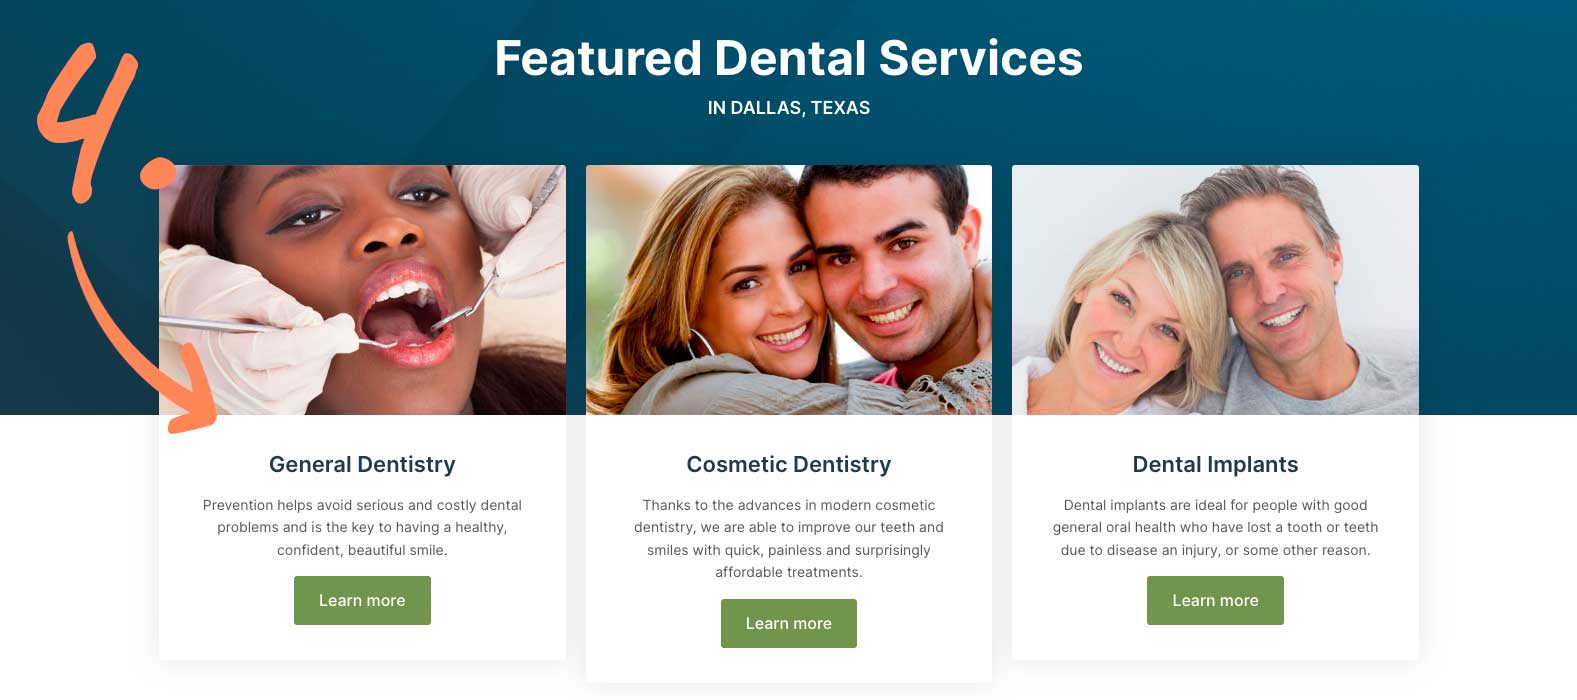 Featured Dental Services